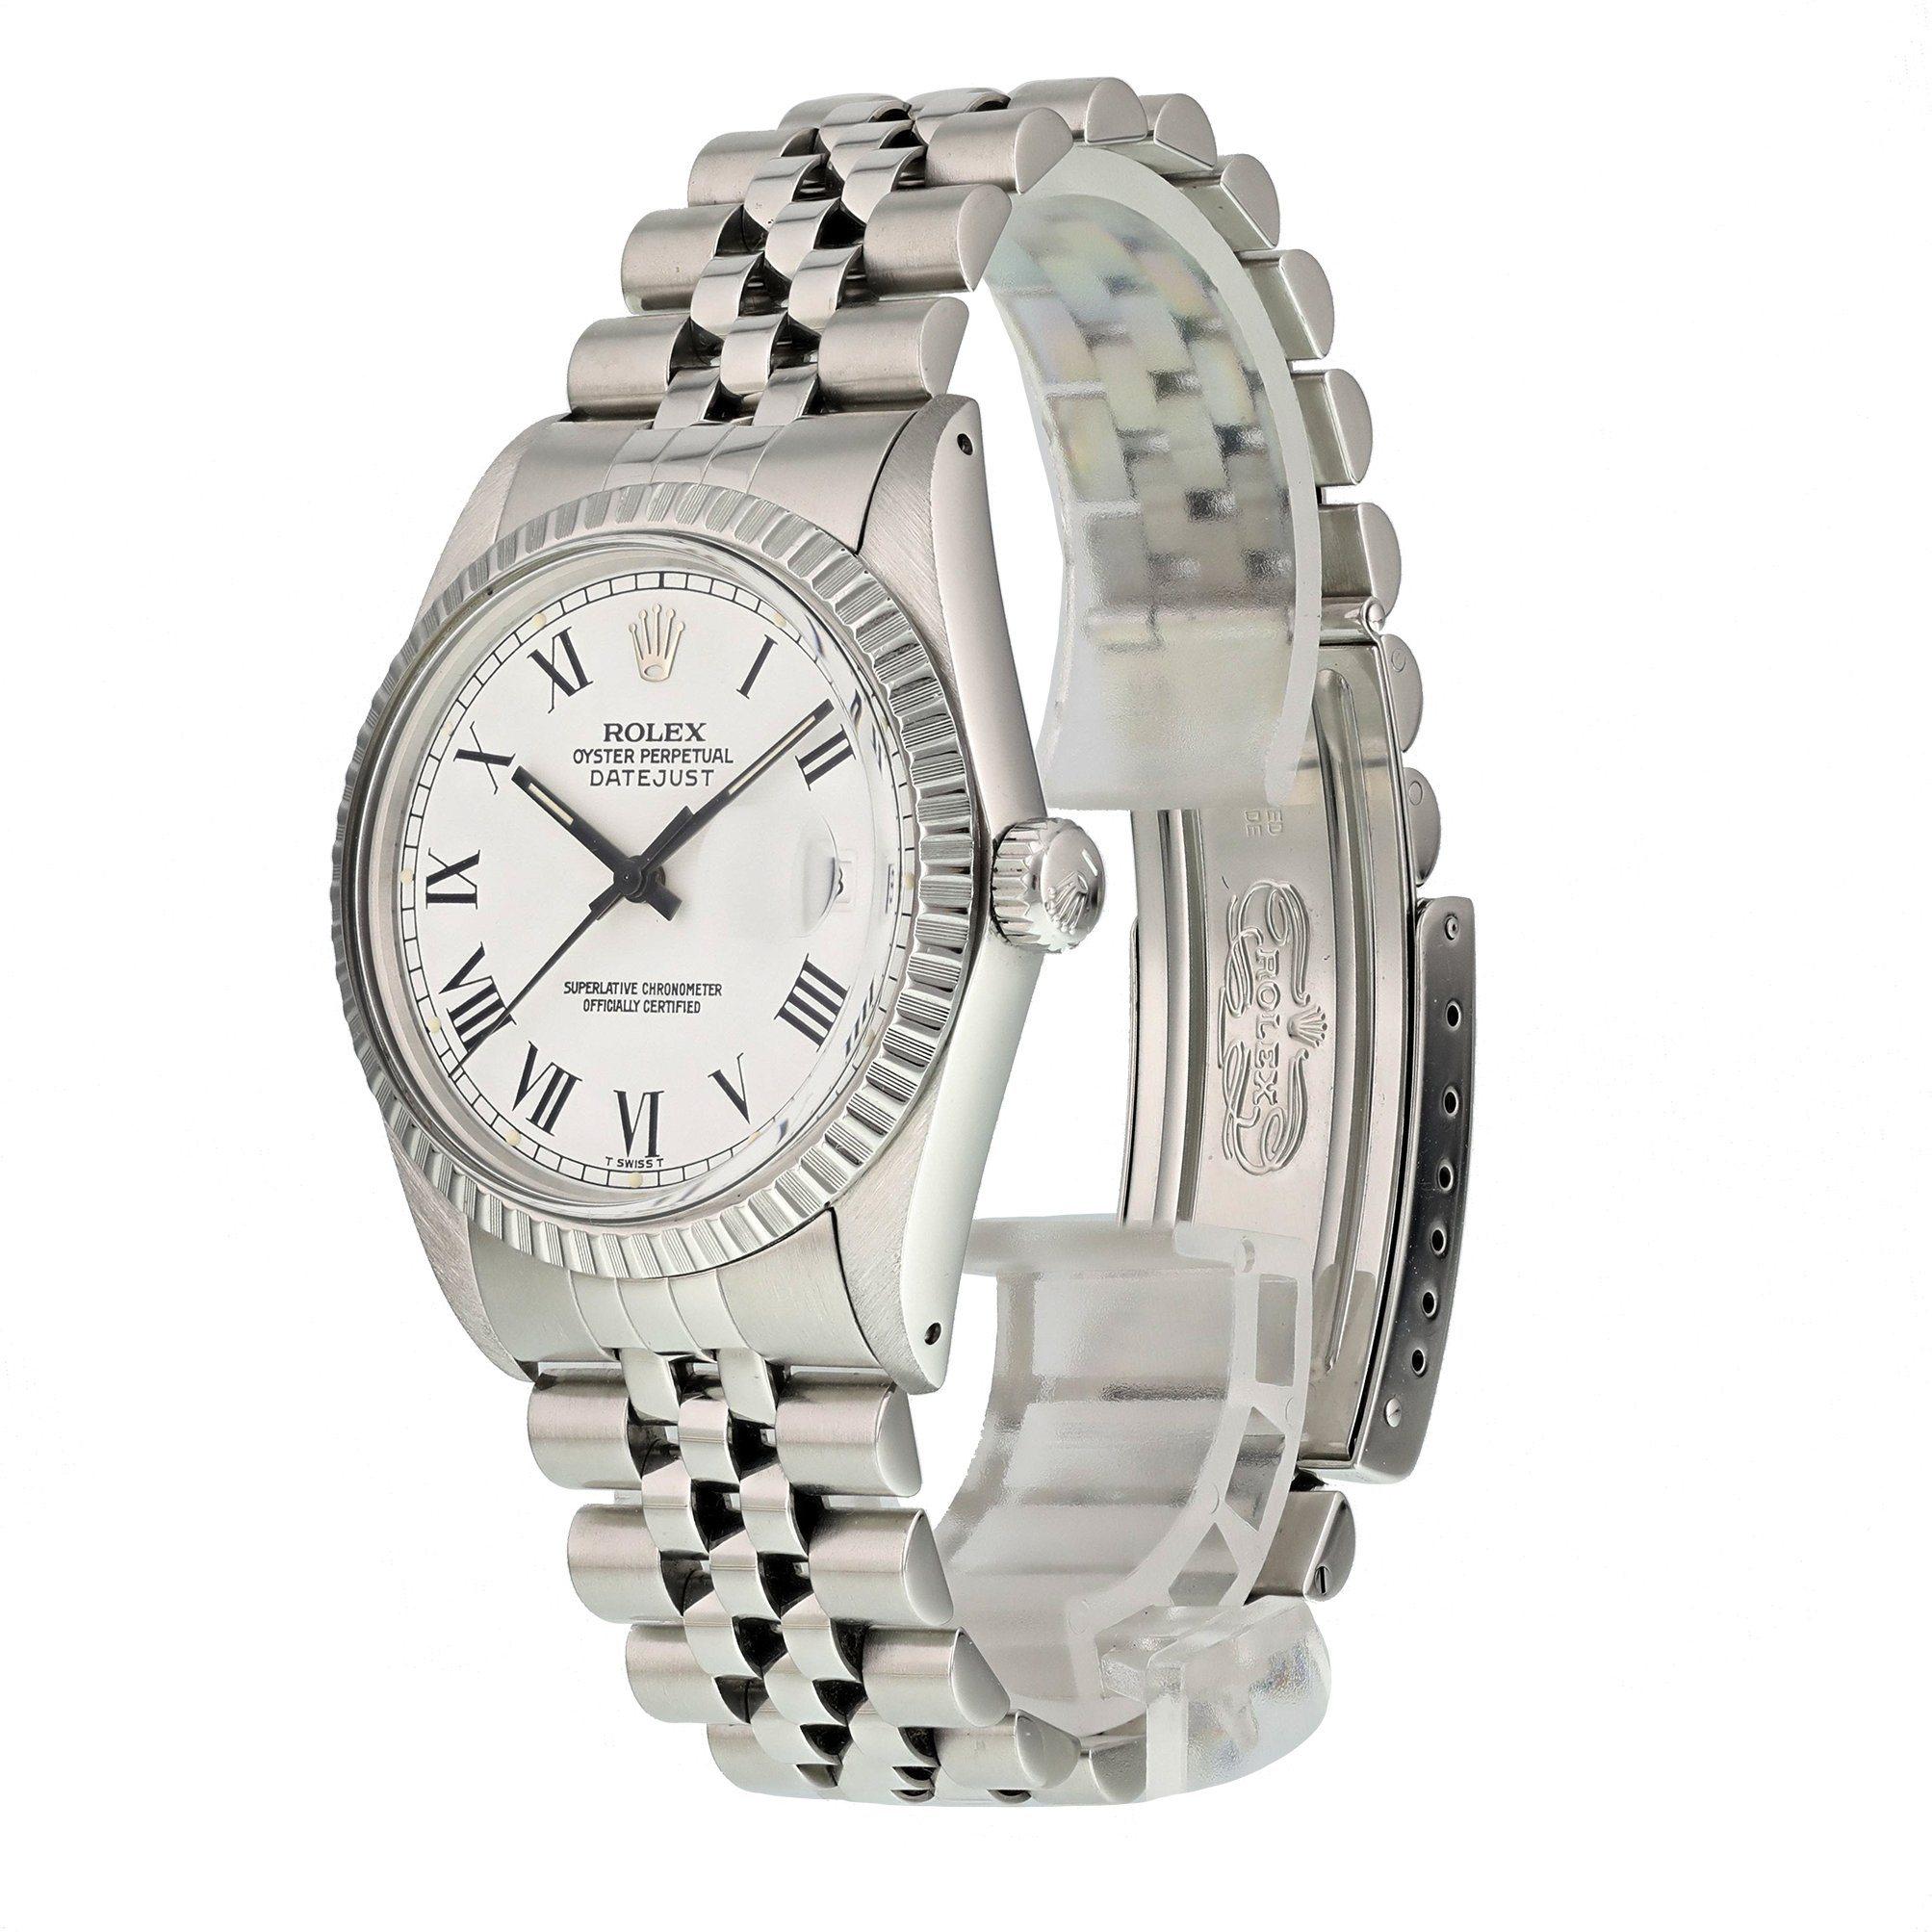 Rolex Datejust 16030 Buckley Dial Men's Watch
36mm Stainless Steel case. 
Stainless Steel engine turn bezel. 
White dial with steel hands and Roman numeral hour markers. 
Minute markers on the outer dial. 
Stainless Steel Bracelet with Fold Over